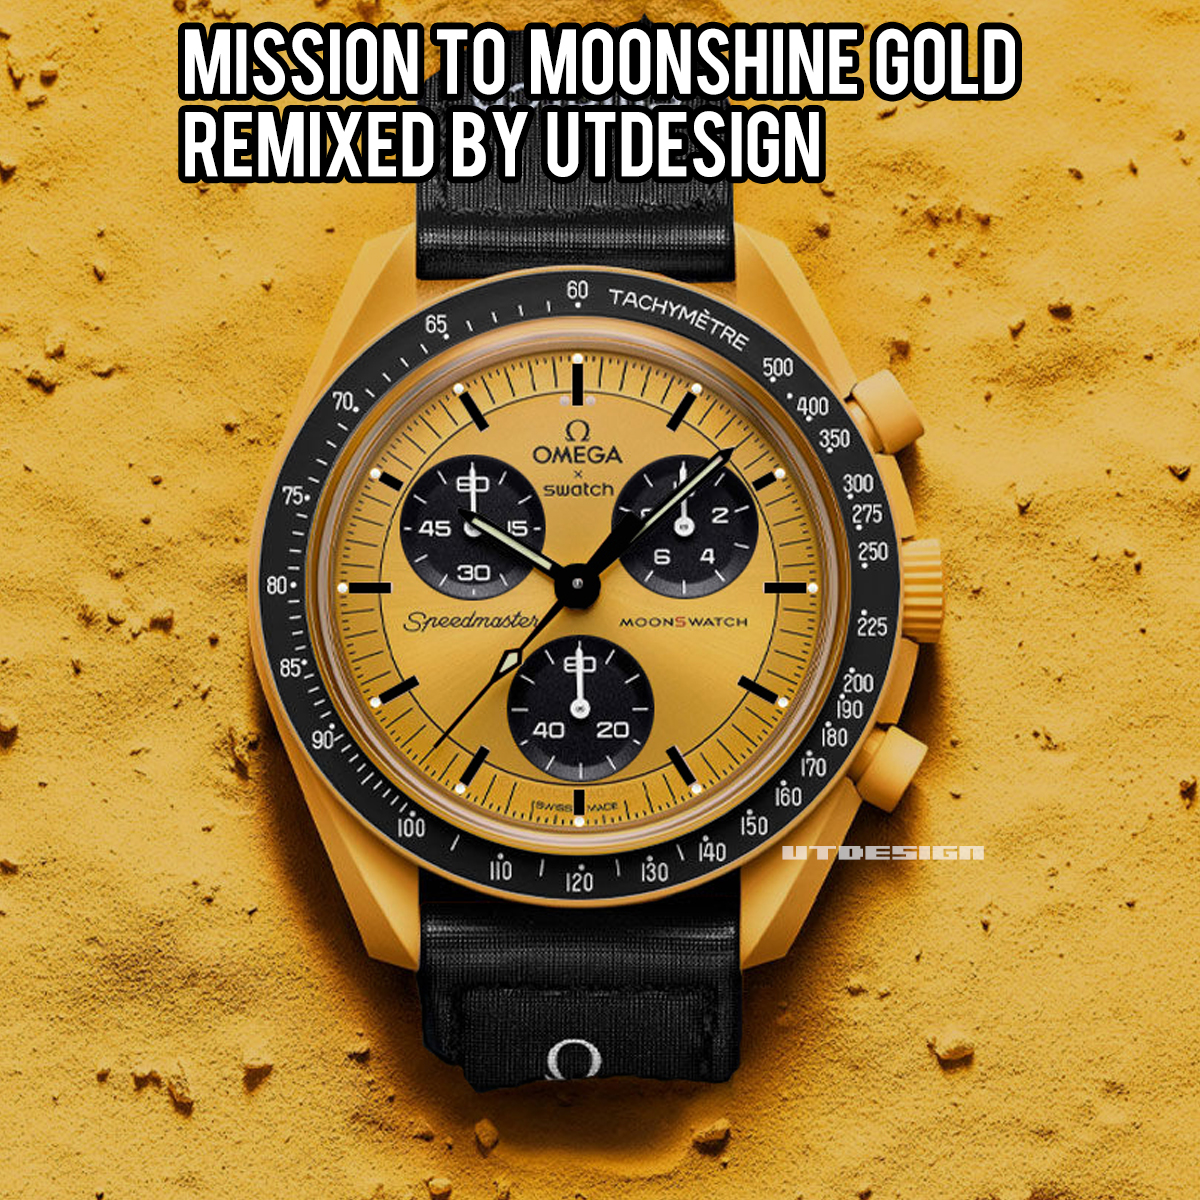 OMEGA x SWATCH / MOONSWATCH-MISSION TO MOONSHINE GOLD remixed by